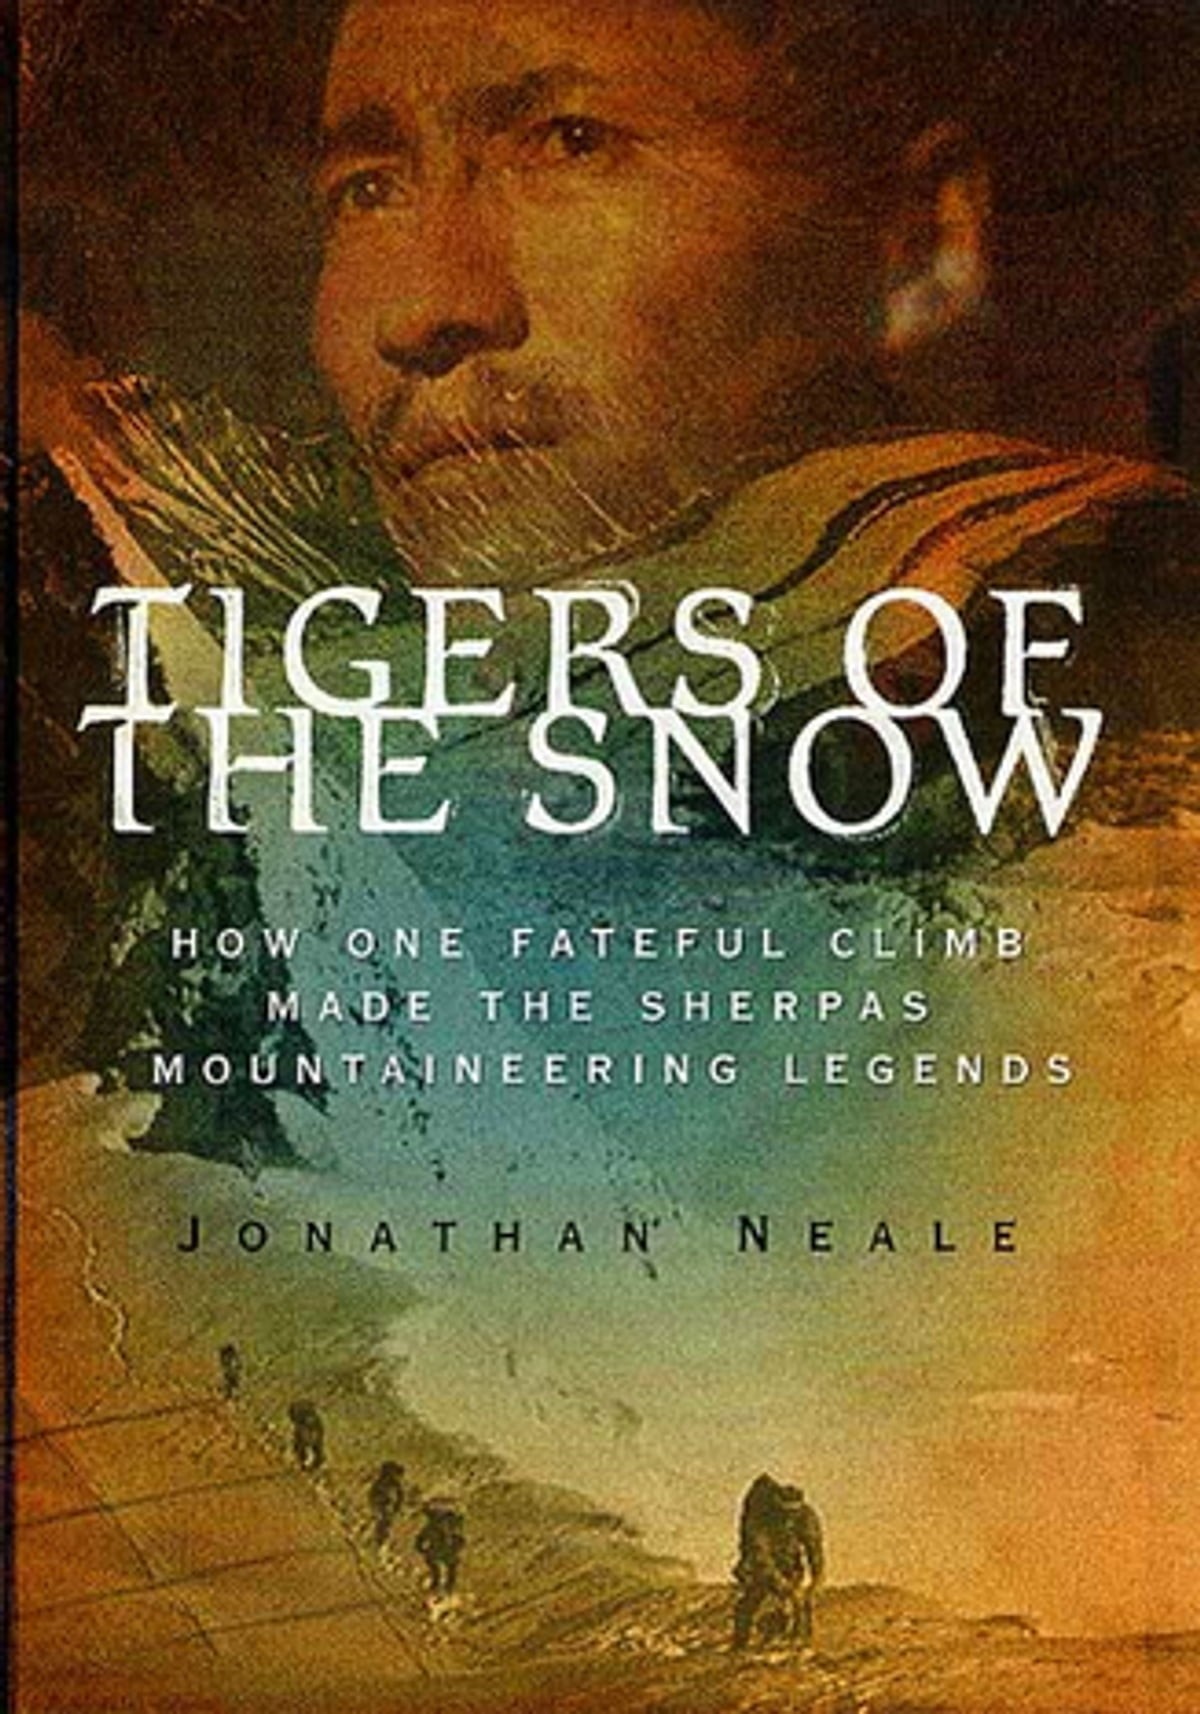 Tigers of the Snow How One Fateful Climb Made The Sherpas Mountaineering Legends - image 1